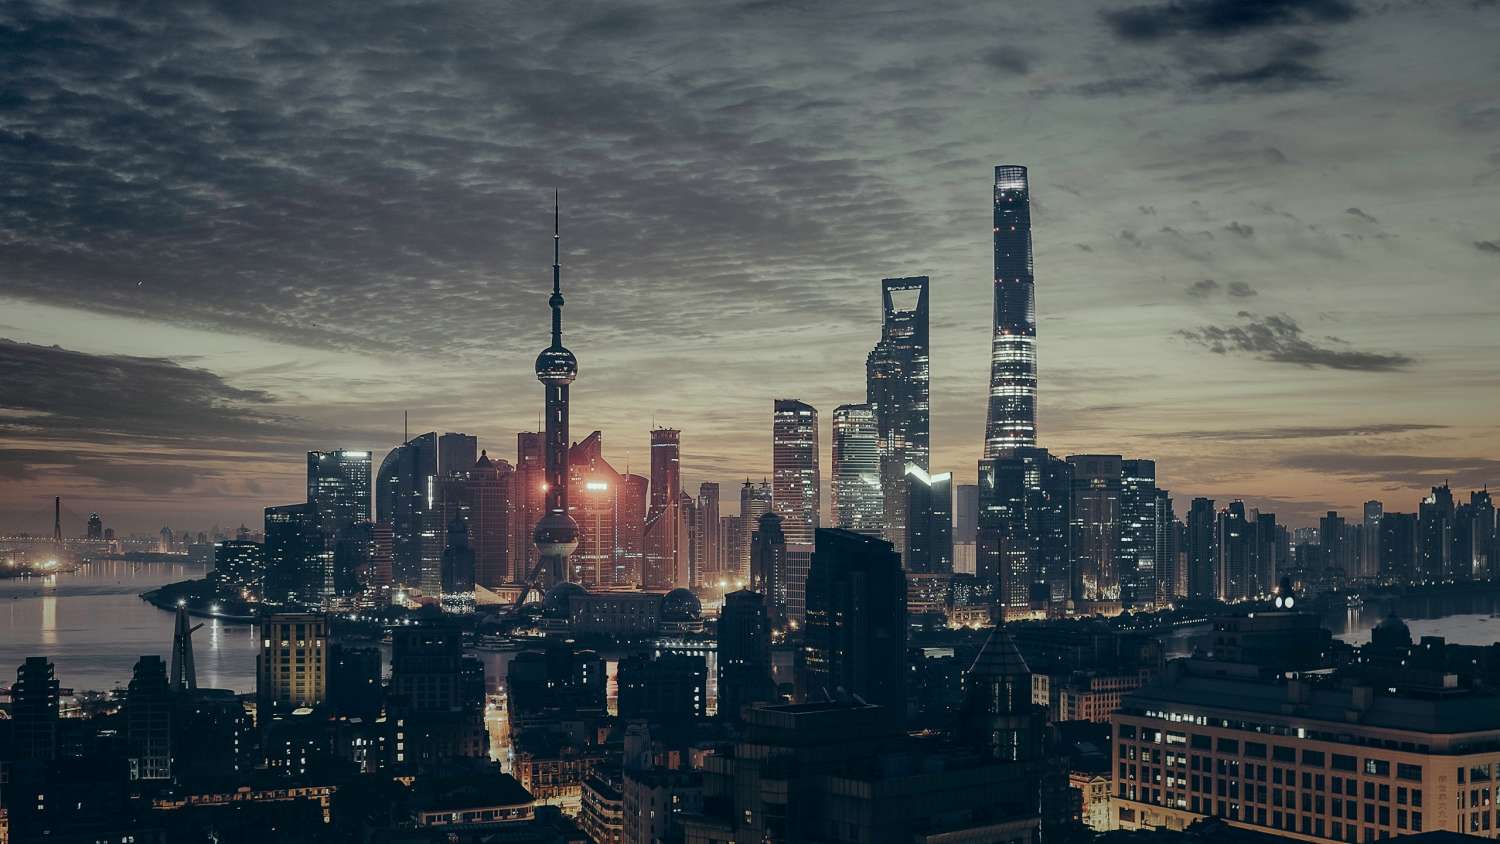 Shanghai skyline and tower at night